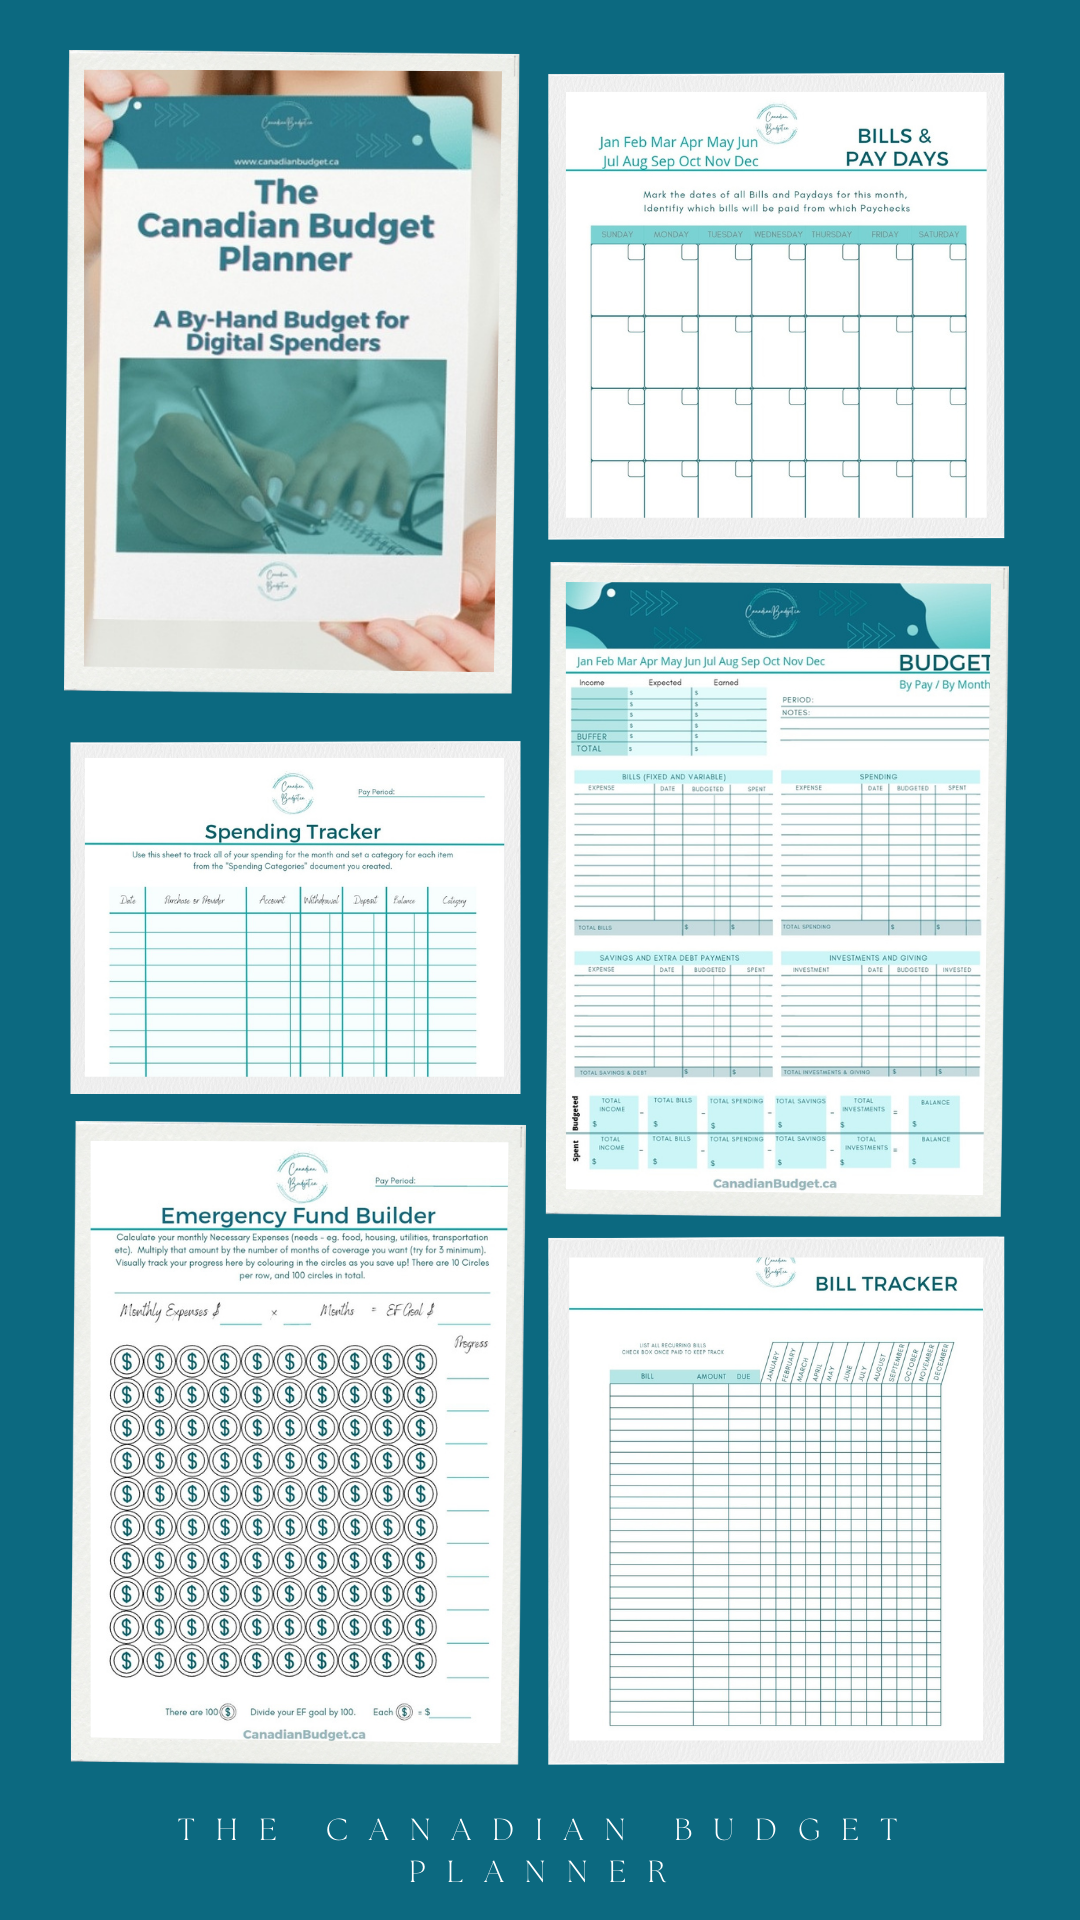 Budget planner Canada - Canadian budget planner